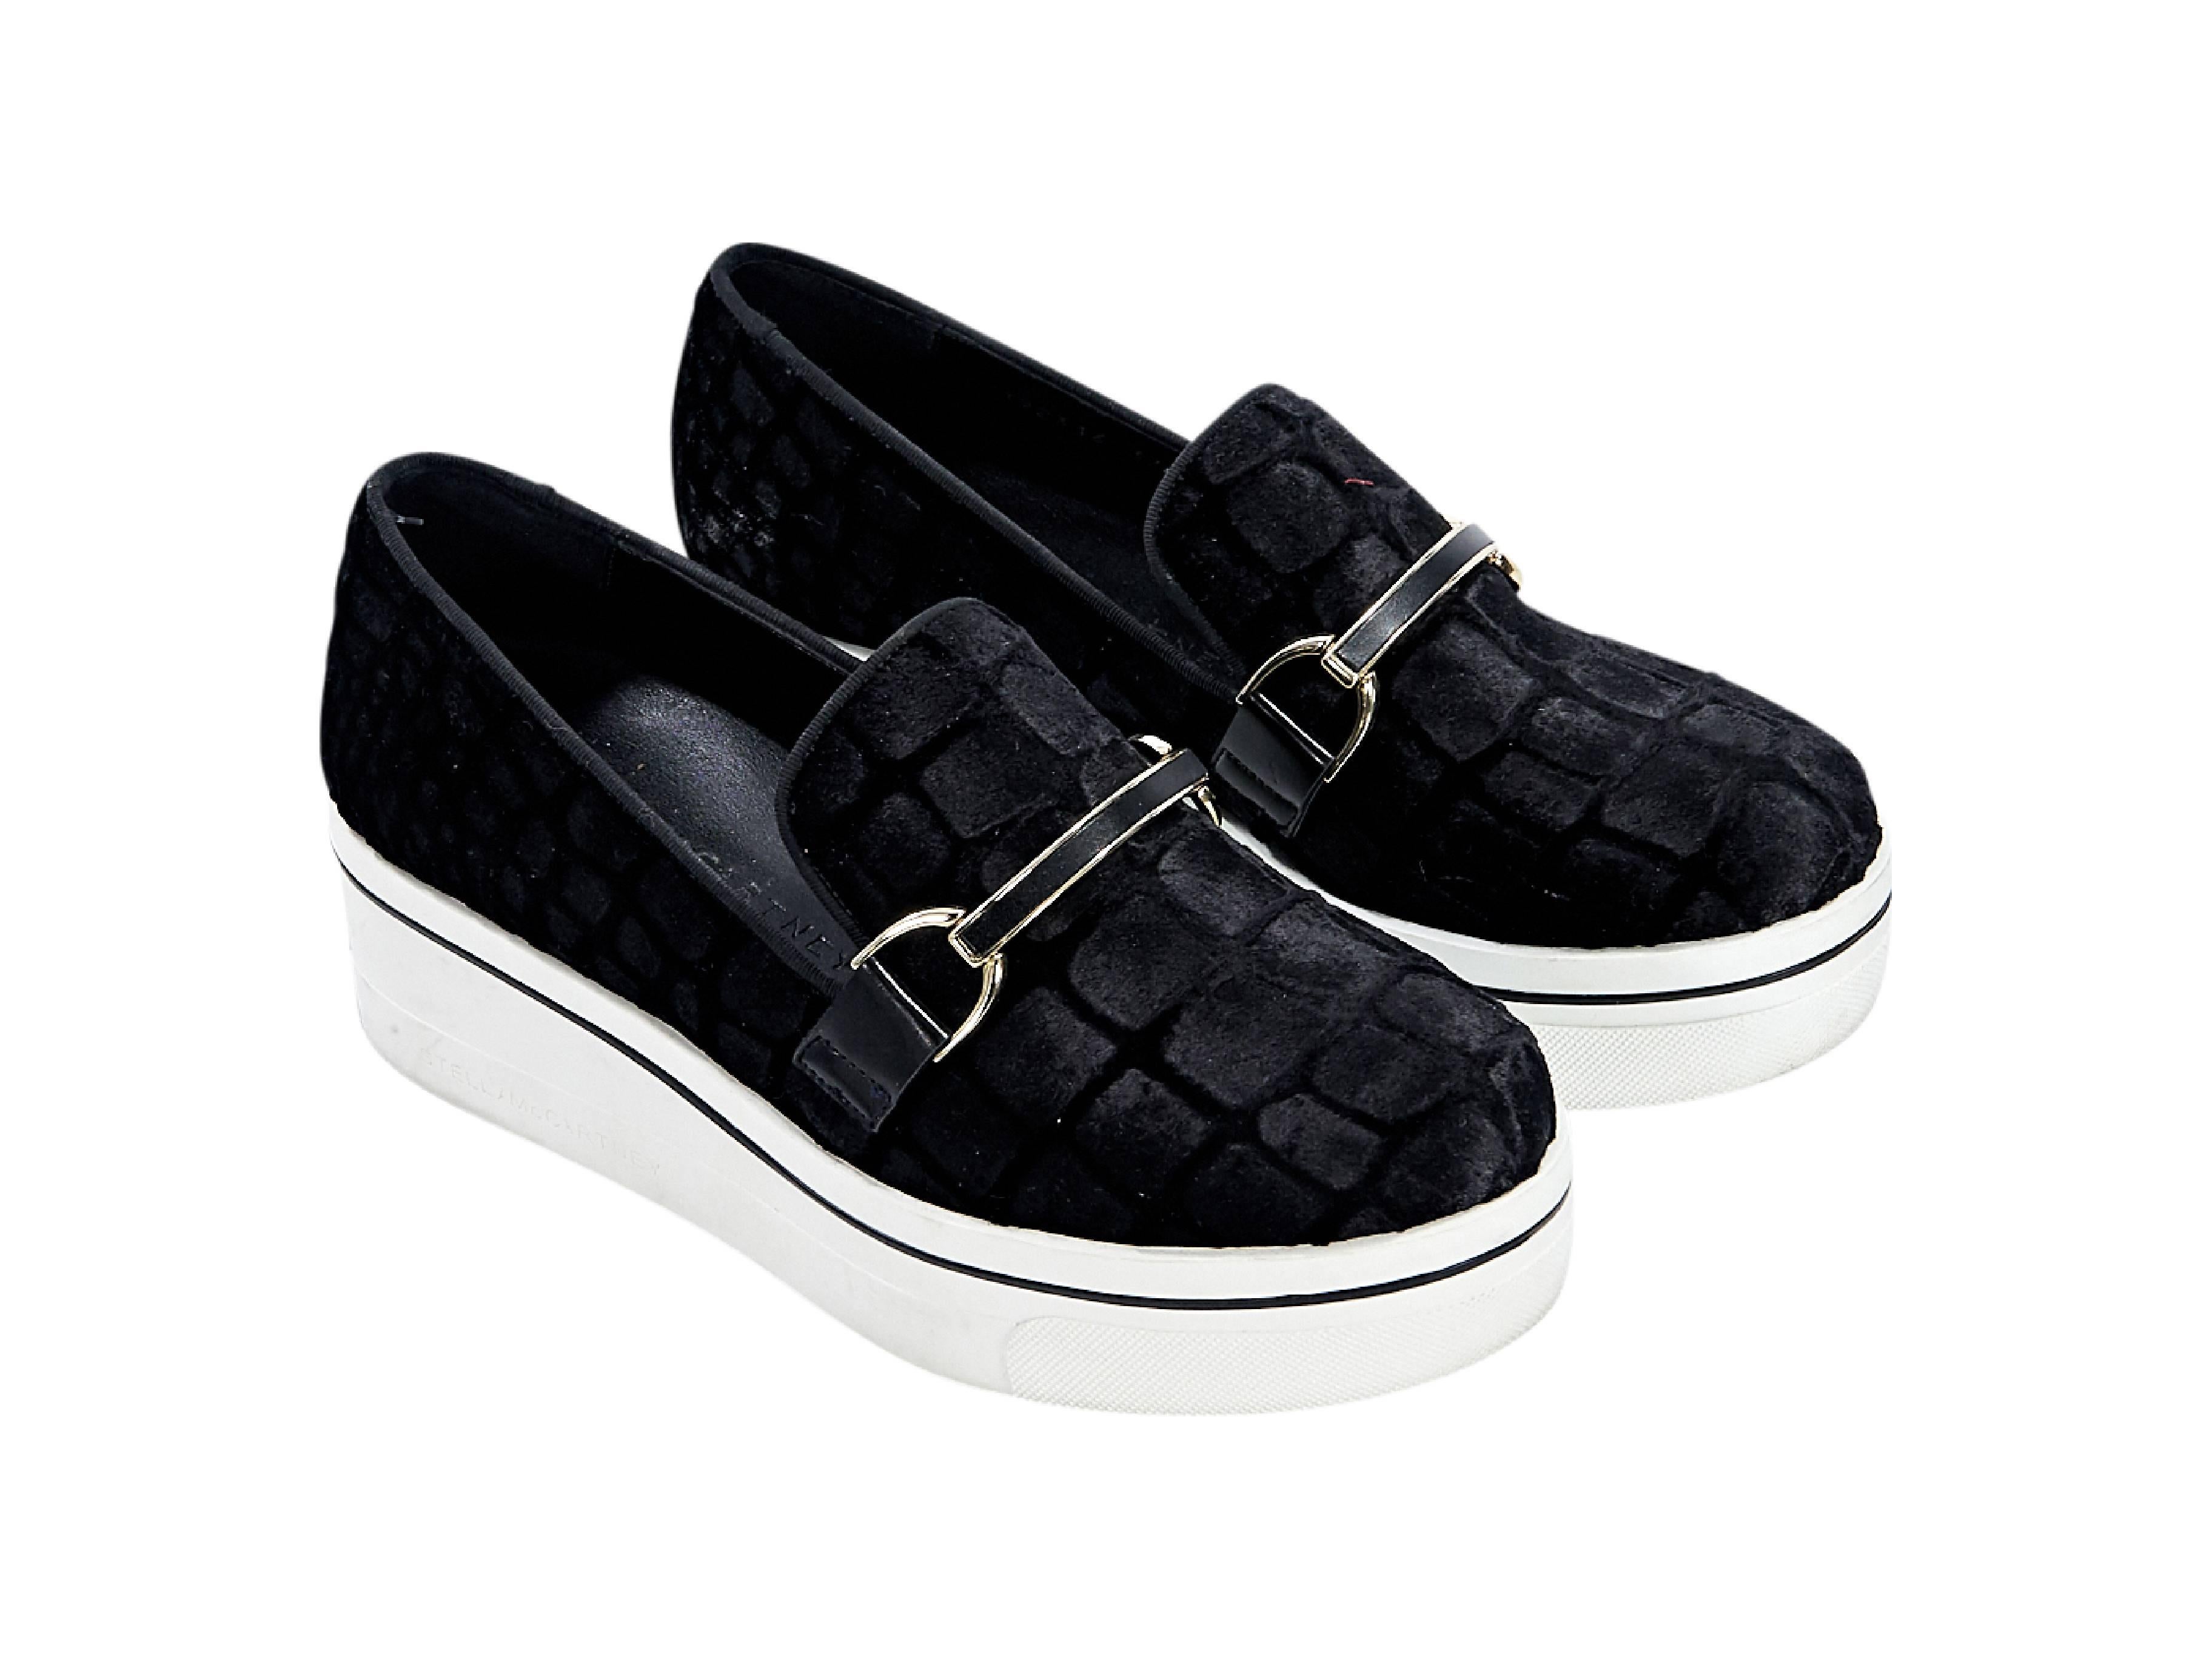 Product details:  Black embossed velvet Binx flatform sneakers by Stella McCartney.  Buckle strap accents vamp.  Round toe.  Slip-on style. Size 7
Condition: Pre-owned. Very good.

Est. Retail $ 595.00